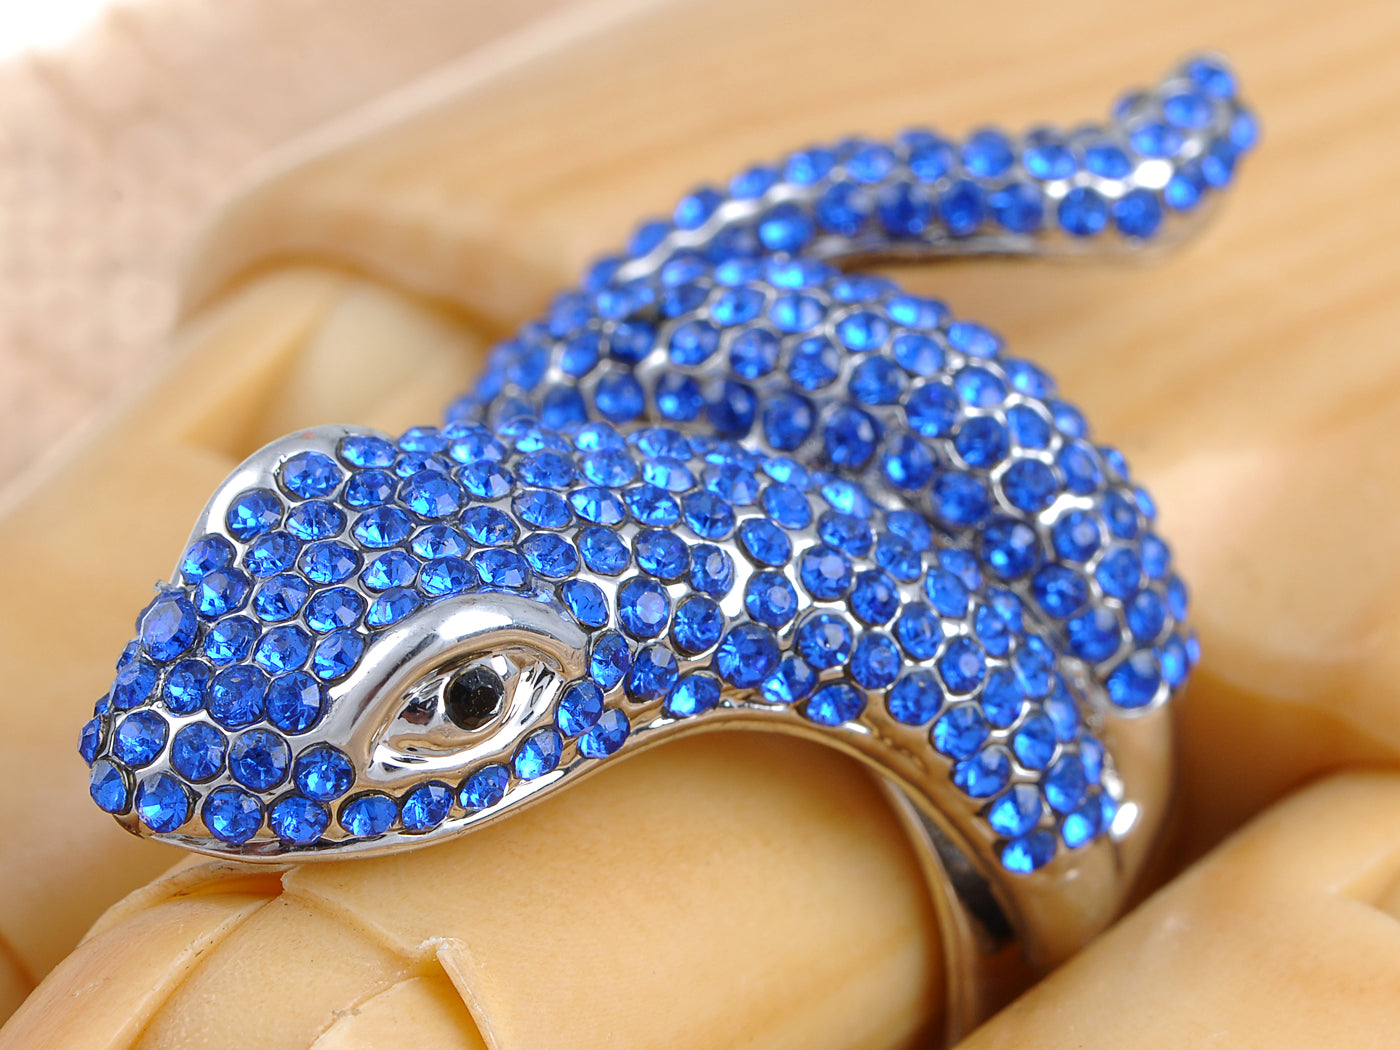 Blue Midgard Serpent Coiled Snake Wrap Statement Halloween Gothic Ring